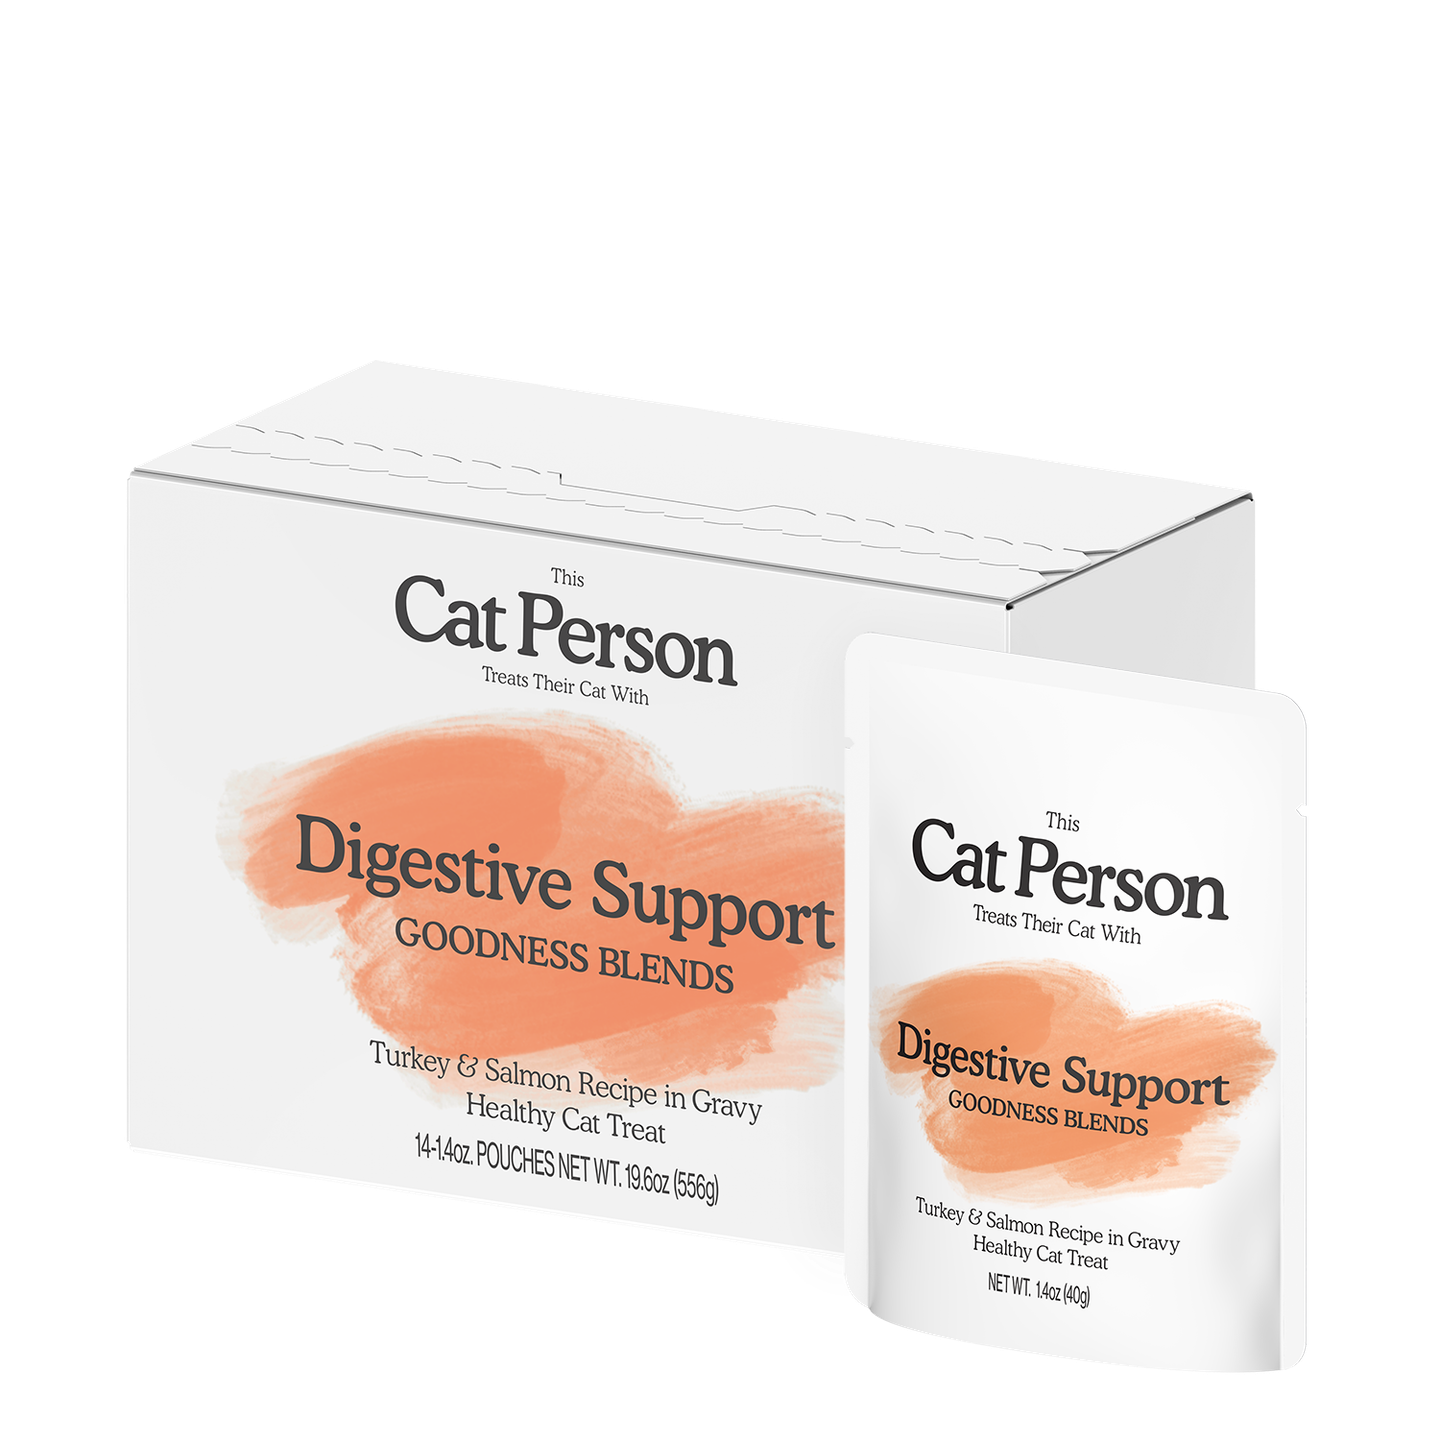 Carton of Cat Person Digestive Support Goodness Blends